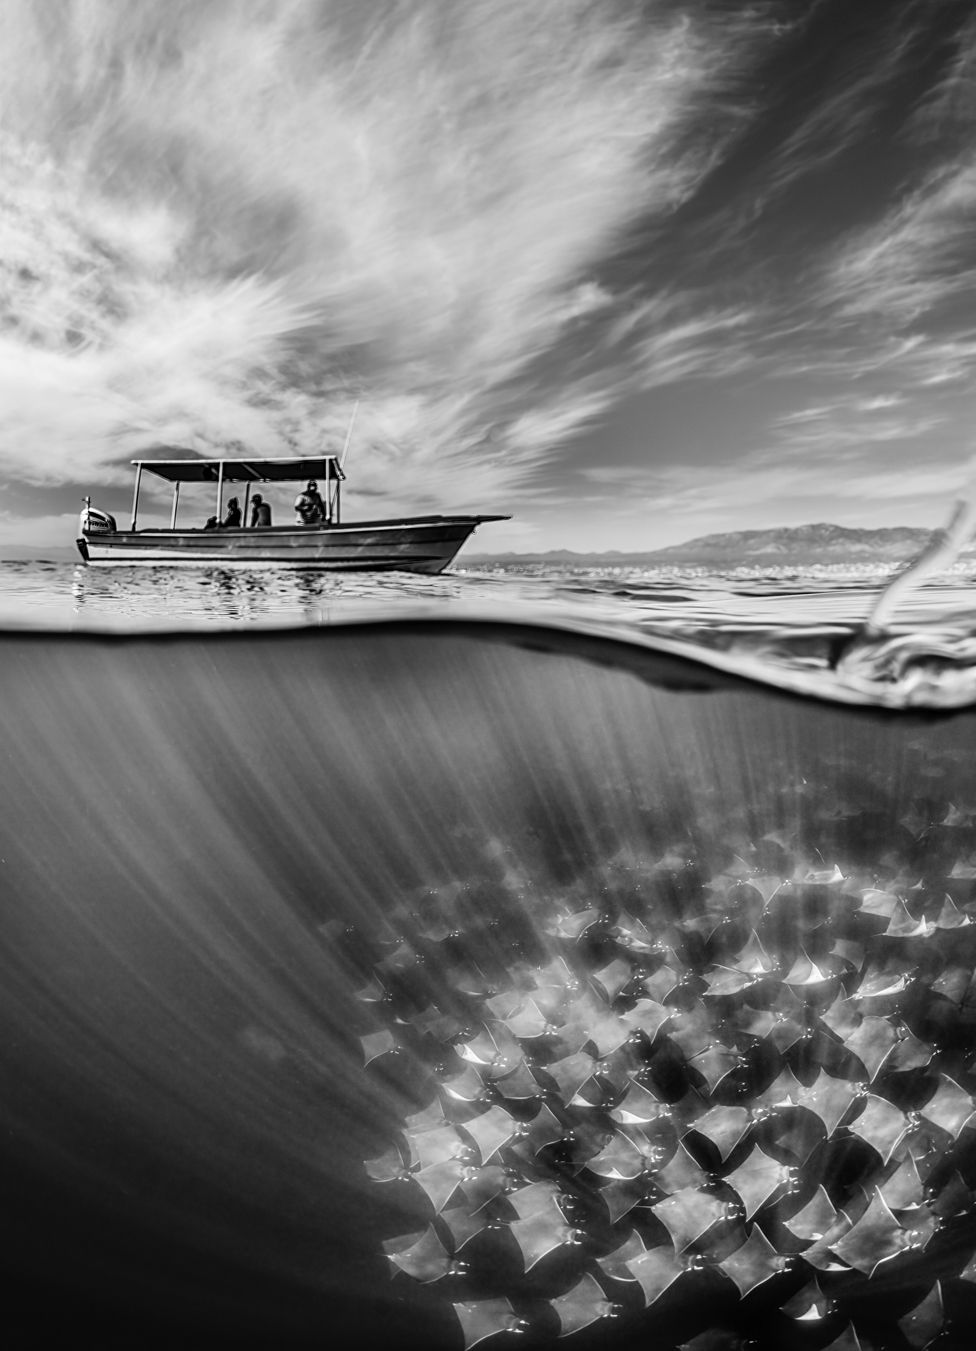 A boat sails above a Mobula ray migration in waters in Baja California, Mexico